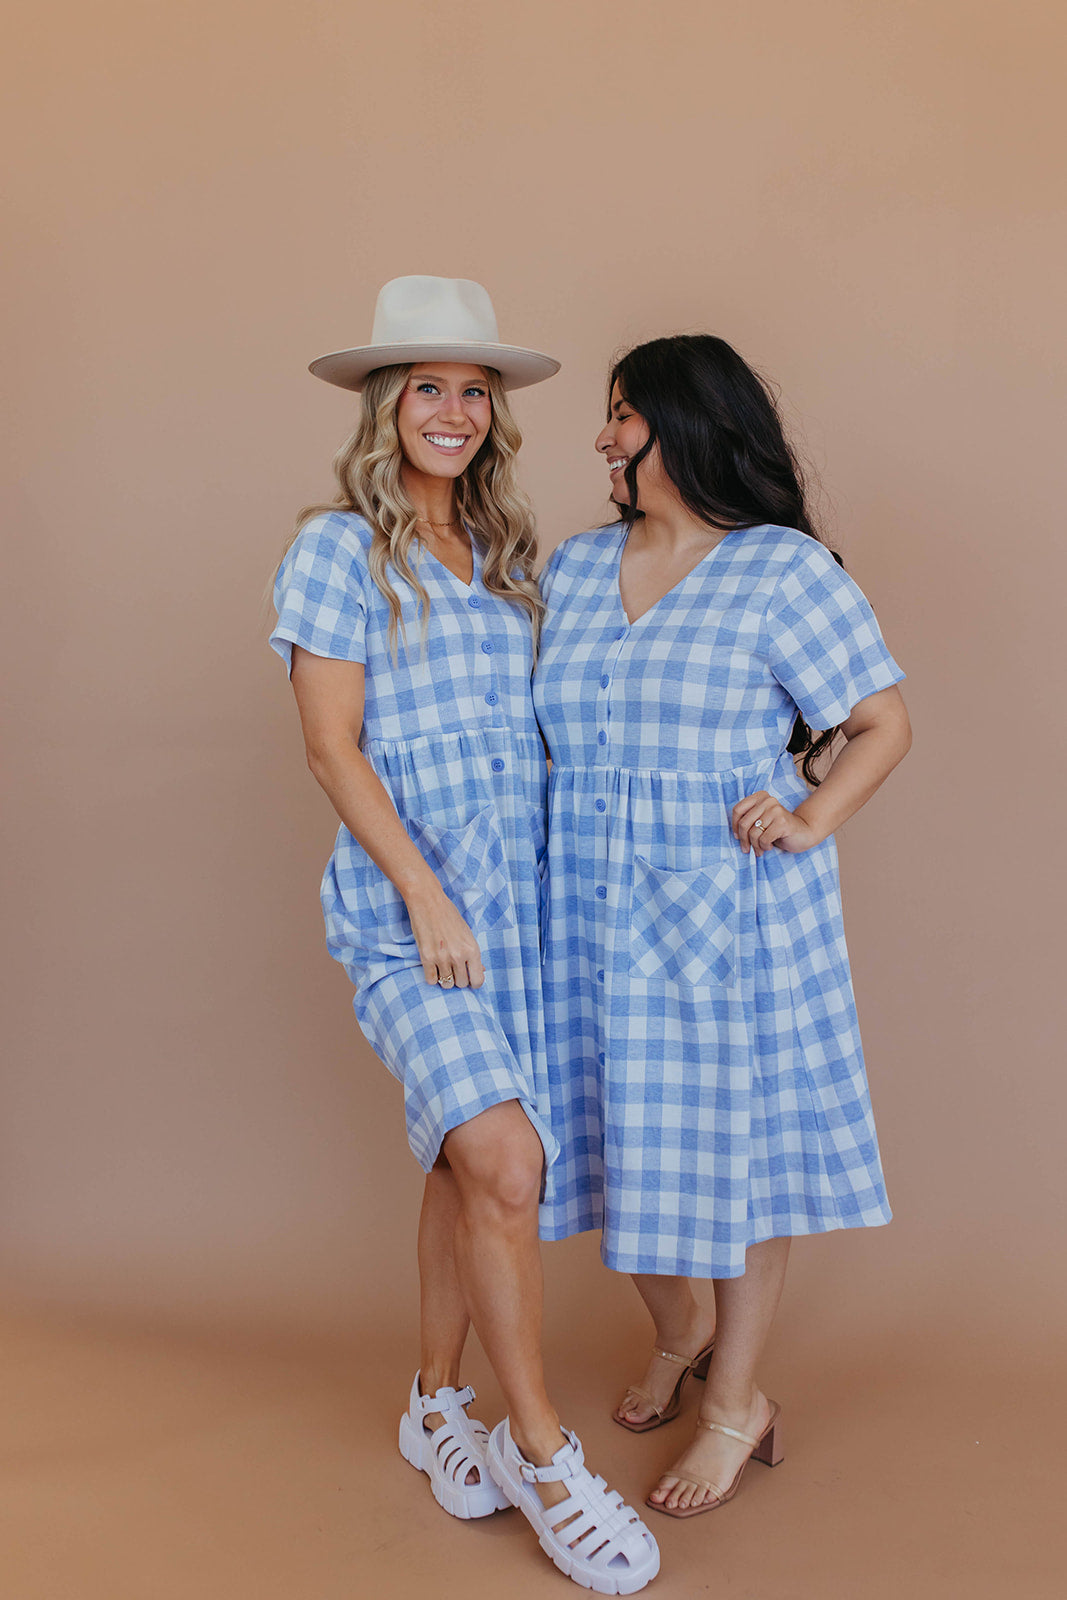 THE BOWIE BUTTON FRONT DRESS IN BLUE GINGHAM